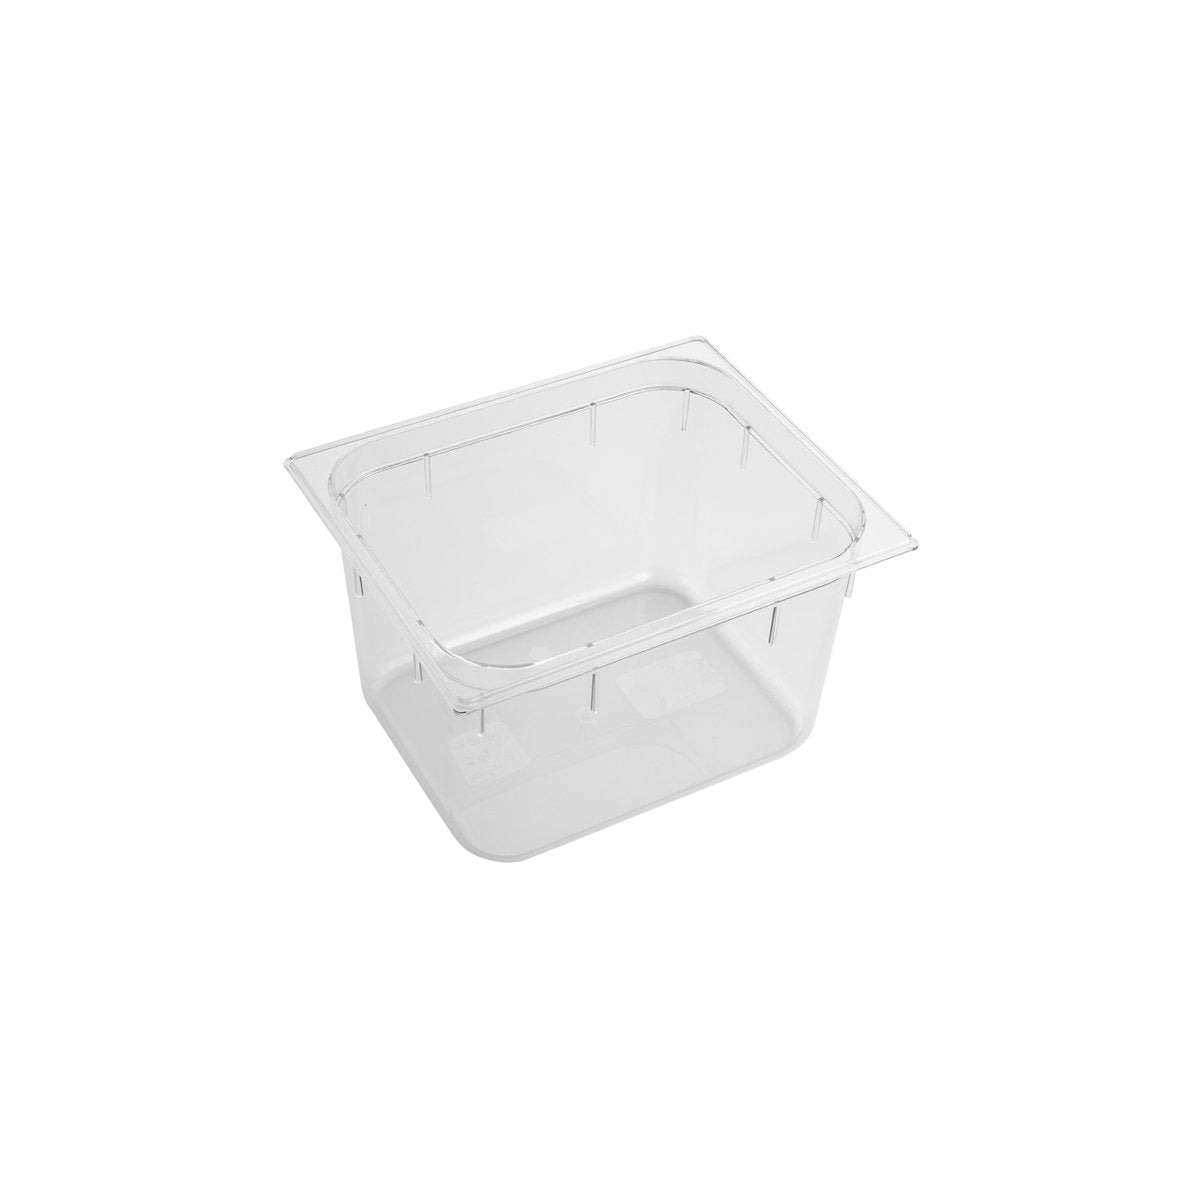 PC-12200CL Inox Macel Gastronorm Pan Polycarbonate Clear 1/2 Size 200mm Tomkin Australia Hospitality Supplies